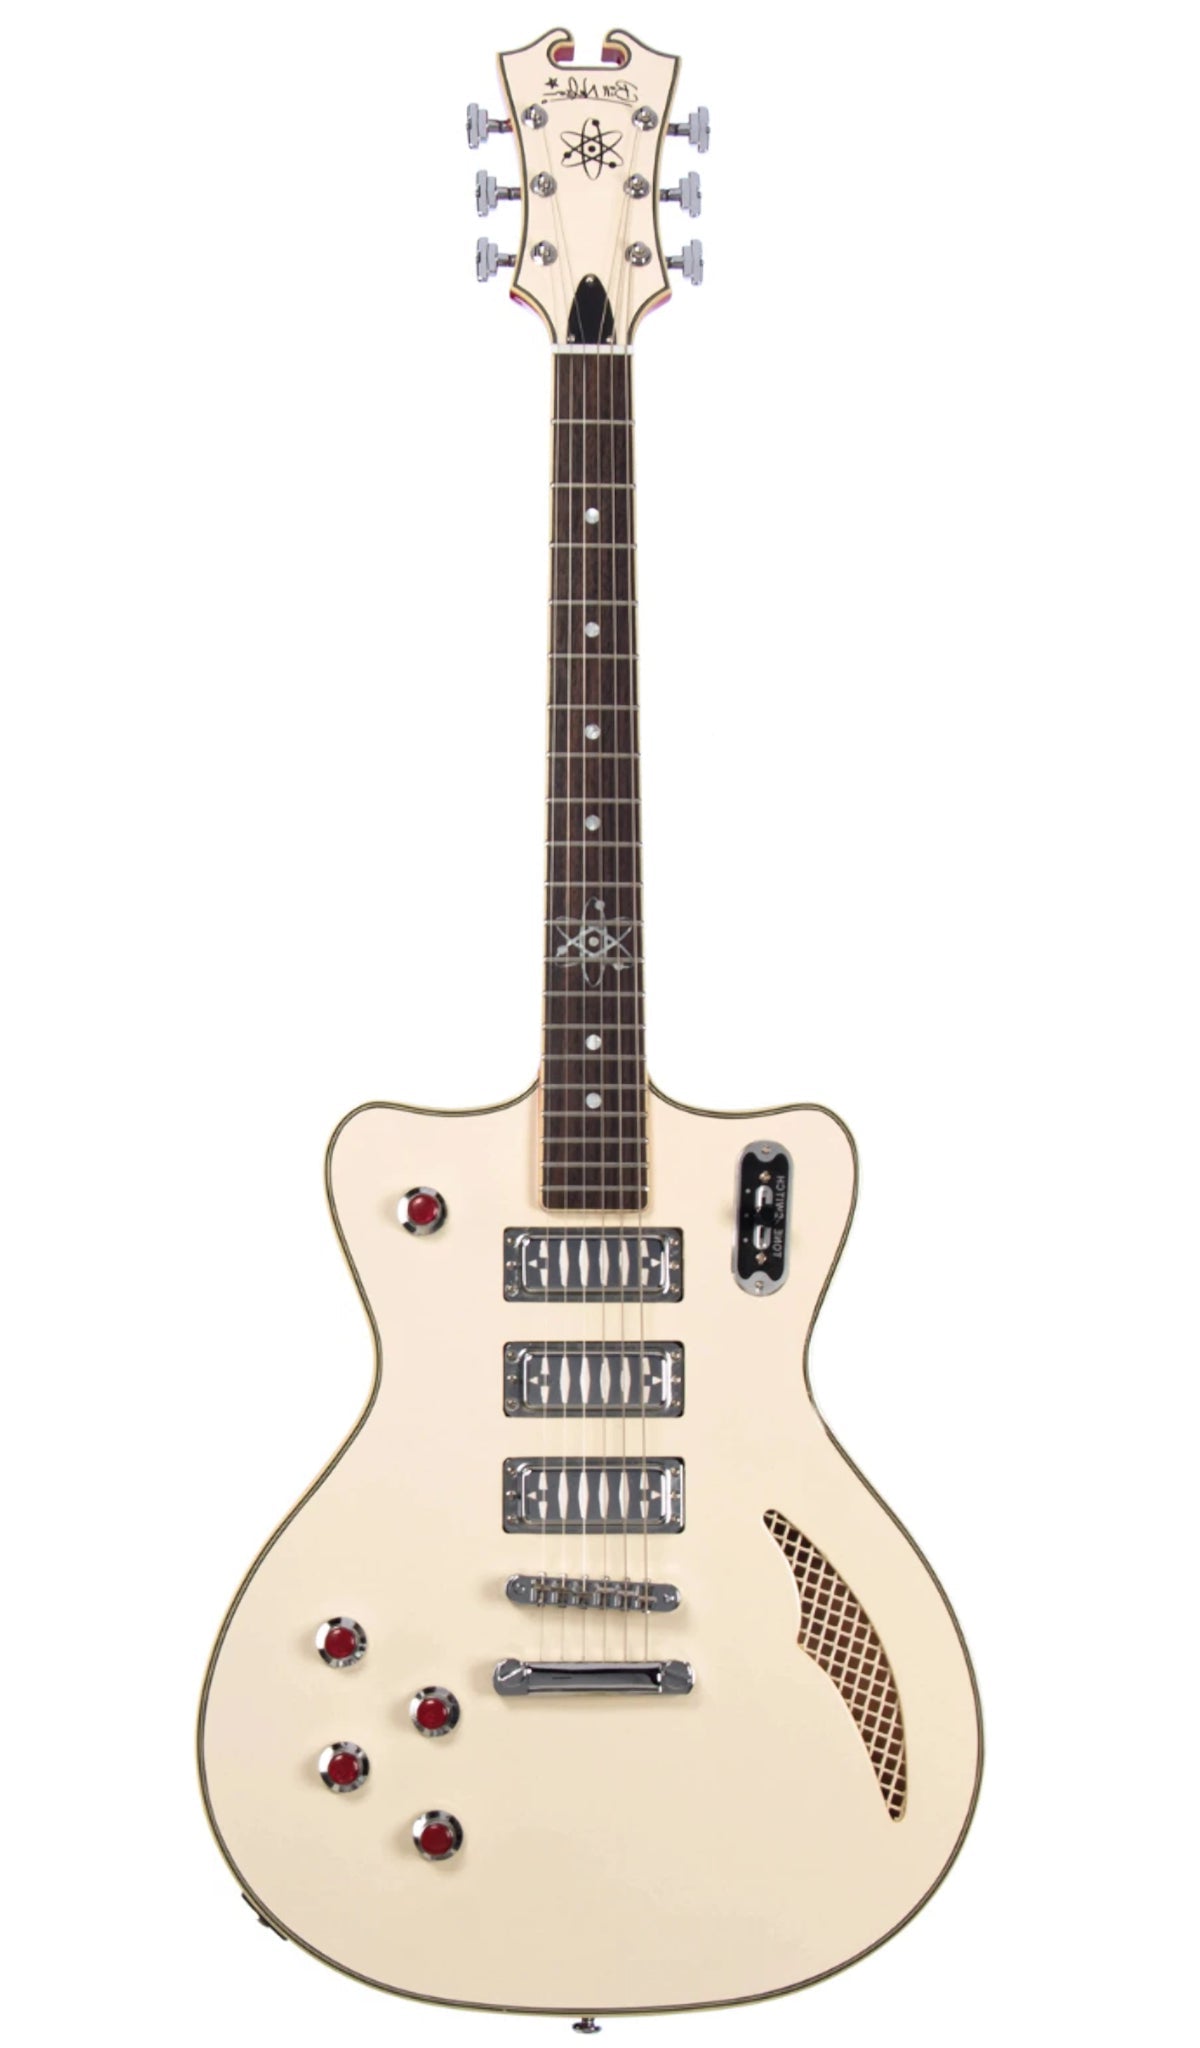 Eastwood Guitars Bill Nelson Astroluxe Cadet Vintage Cream and Fiesta Red LH #color_vintage-cream-and-fiesta-red